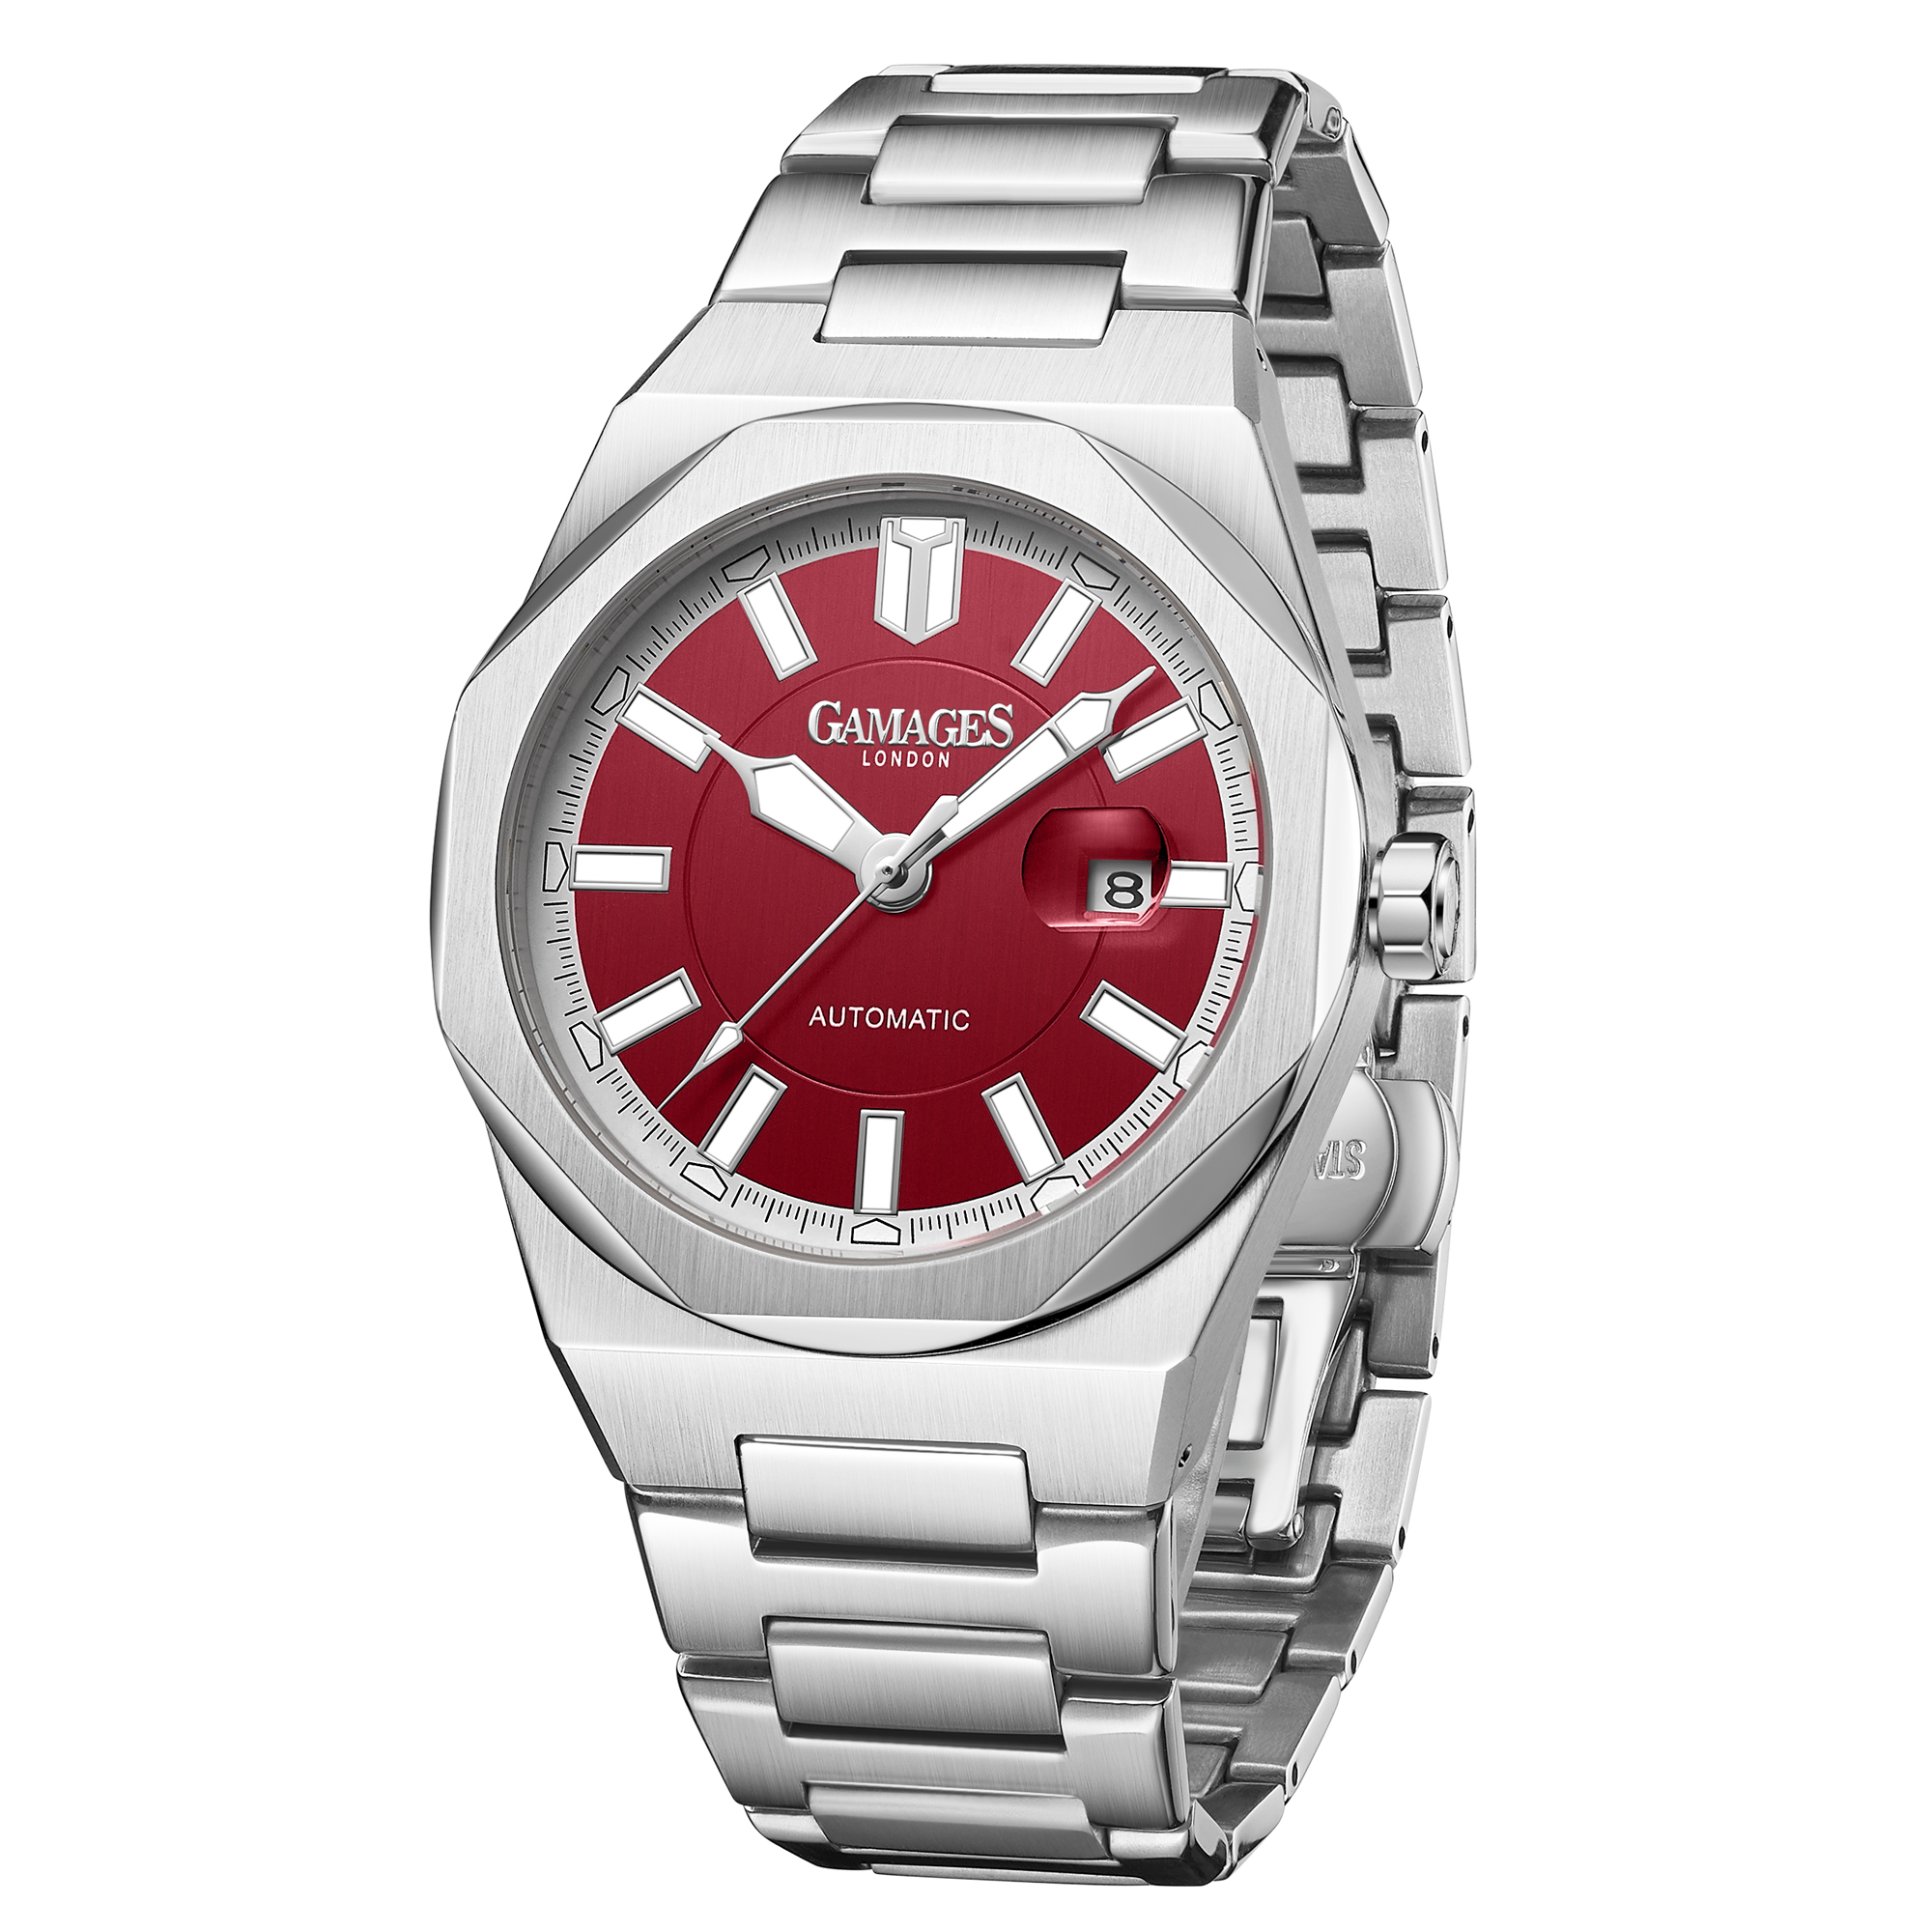 Ltd Edition Hand Assembled Gamages Quintessential Automatic Red – 5 Year Warranty & Free Delivery - Image 5 of 5